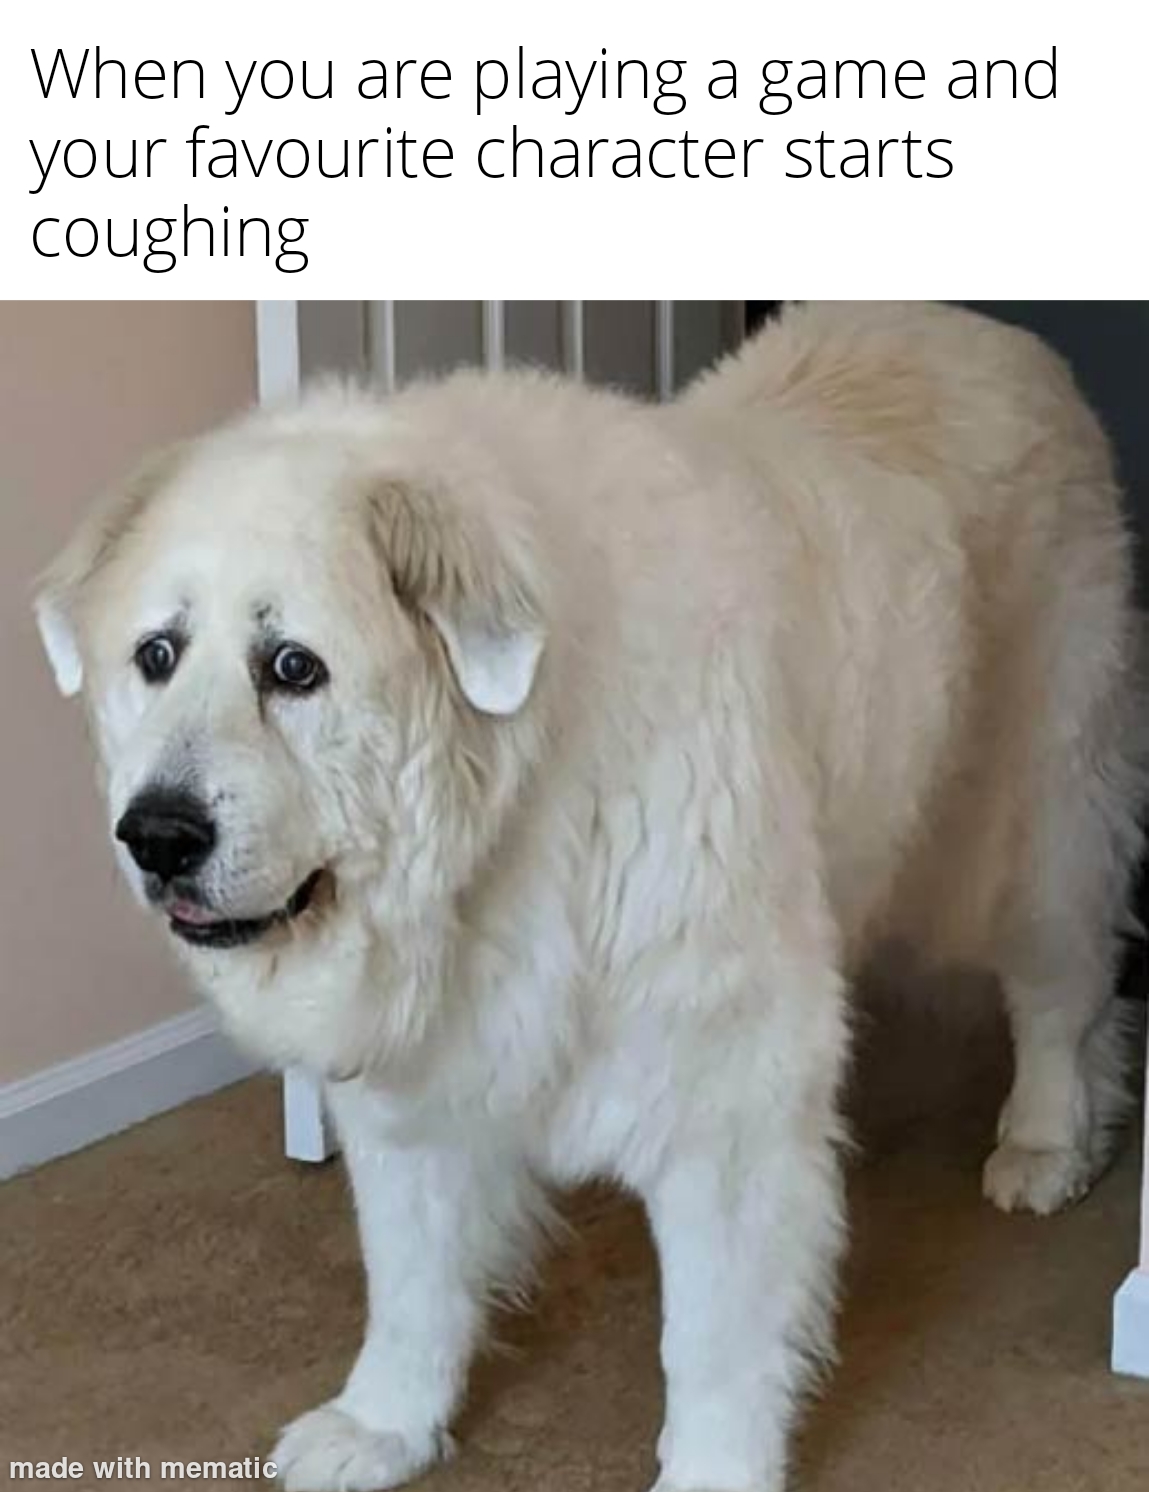 funny memes - scared great pyrenees meme - When you are playing a game and your favourite character starts coughing made with mematic